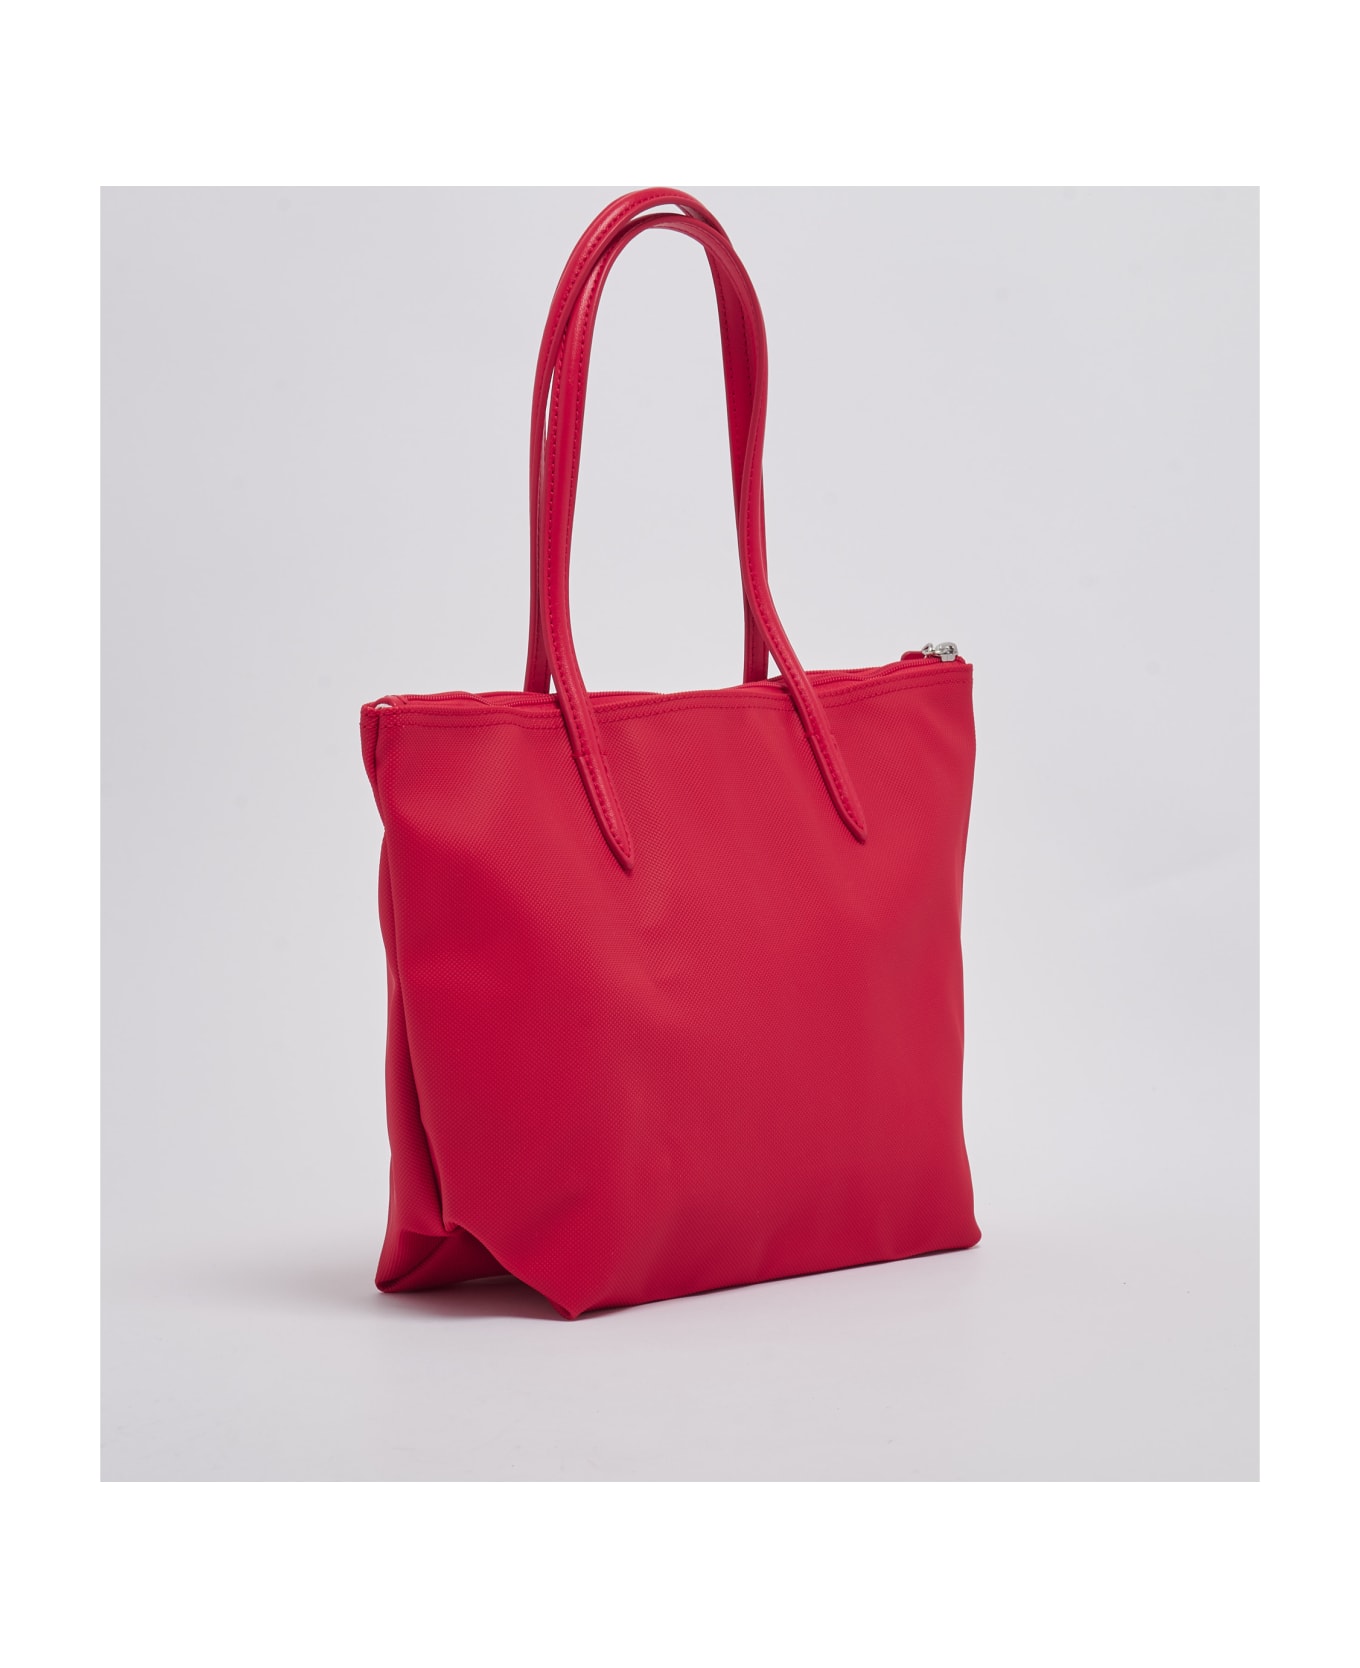 Lacoste Pvc Shopping Bag - ROSSO